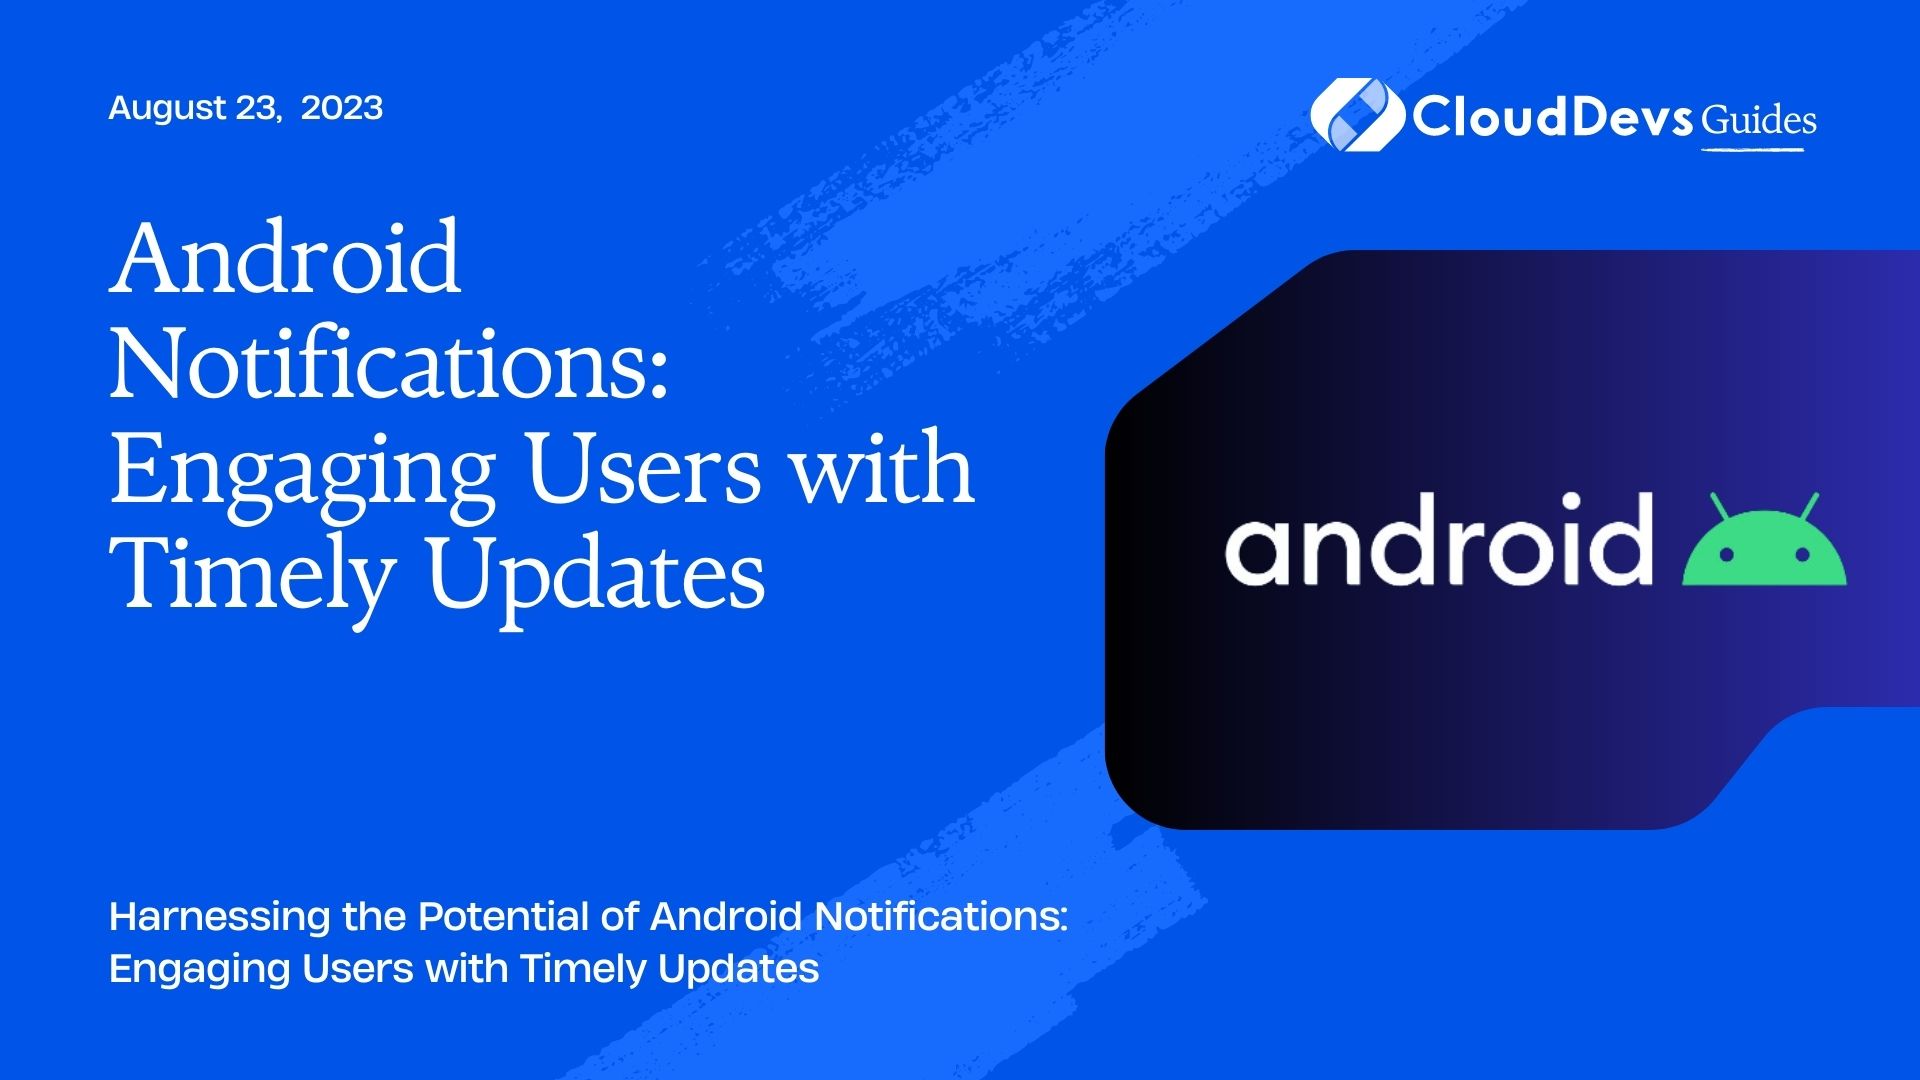 Android Notifications: Engaging Users with Timely Updates